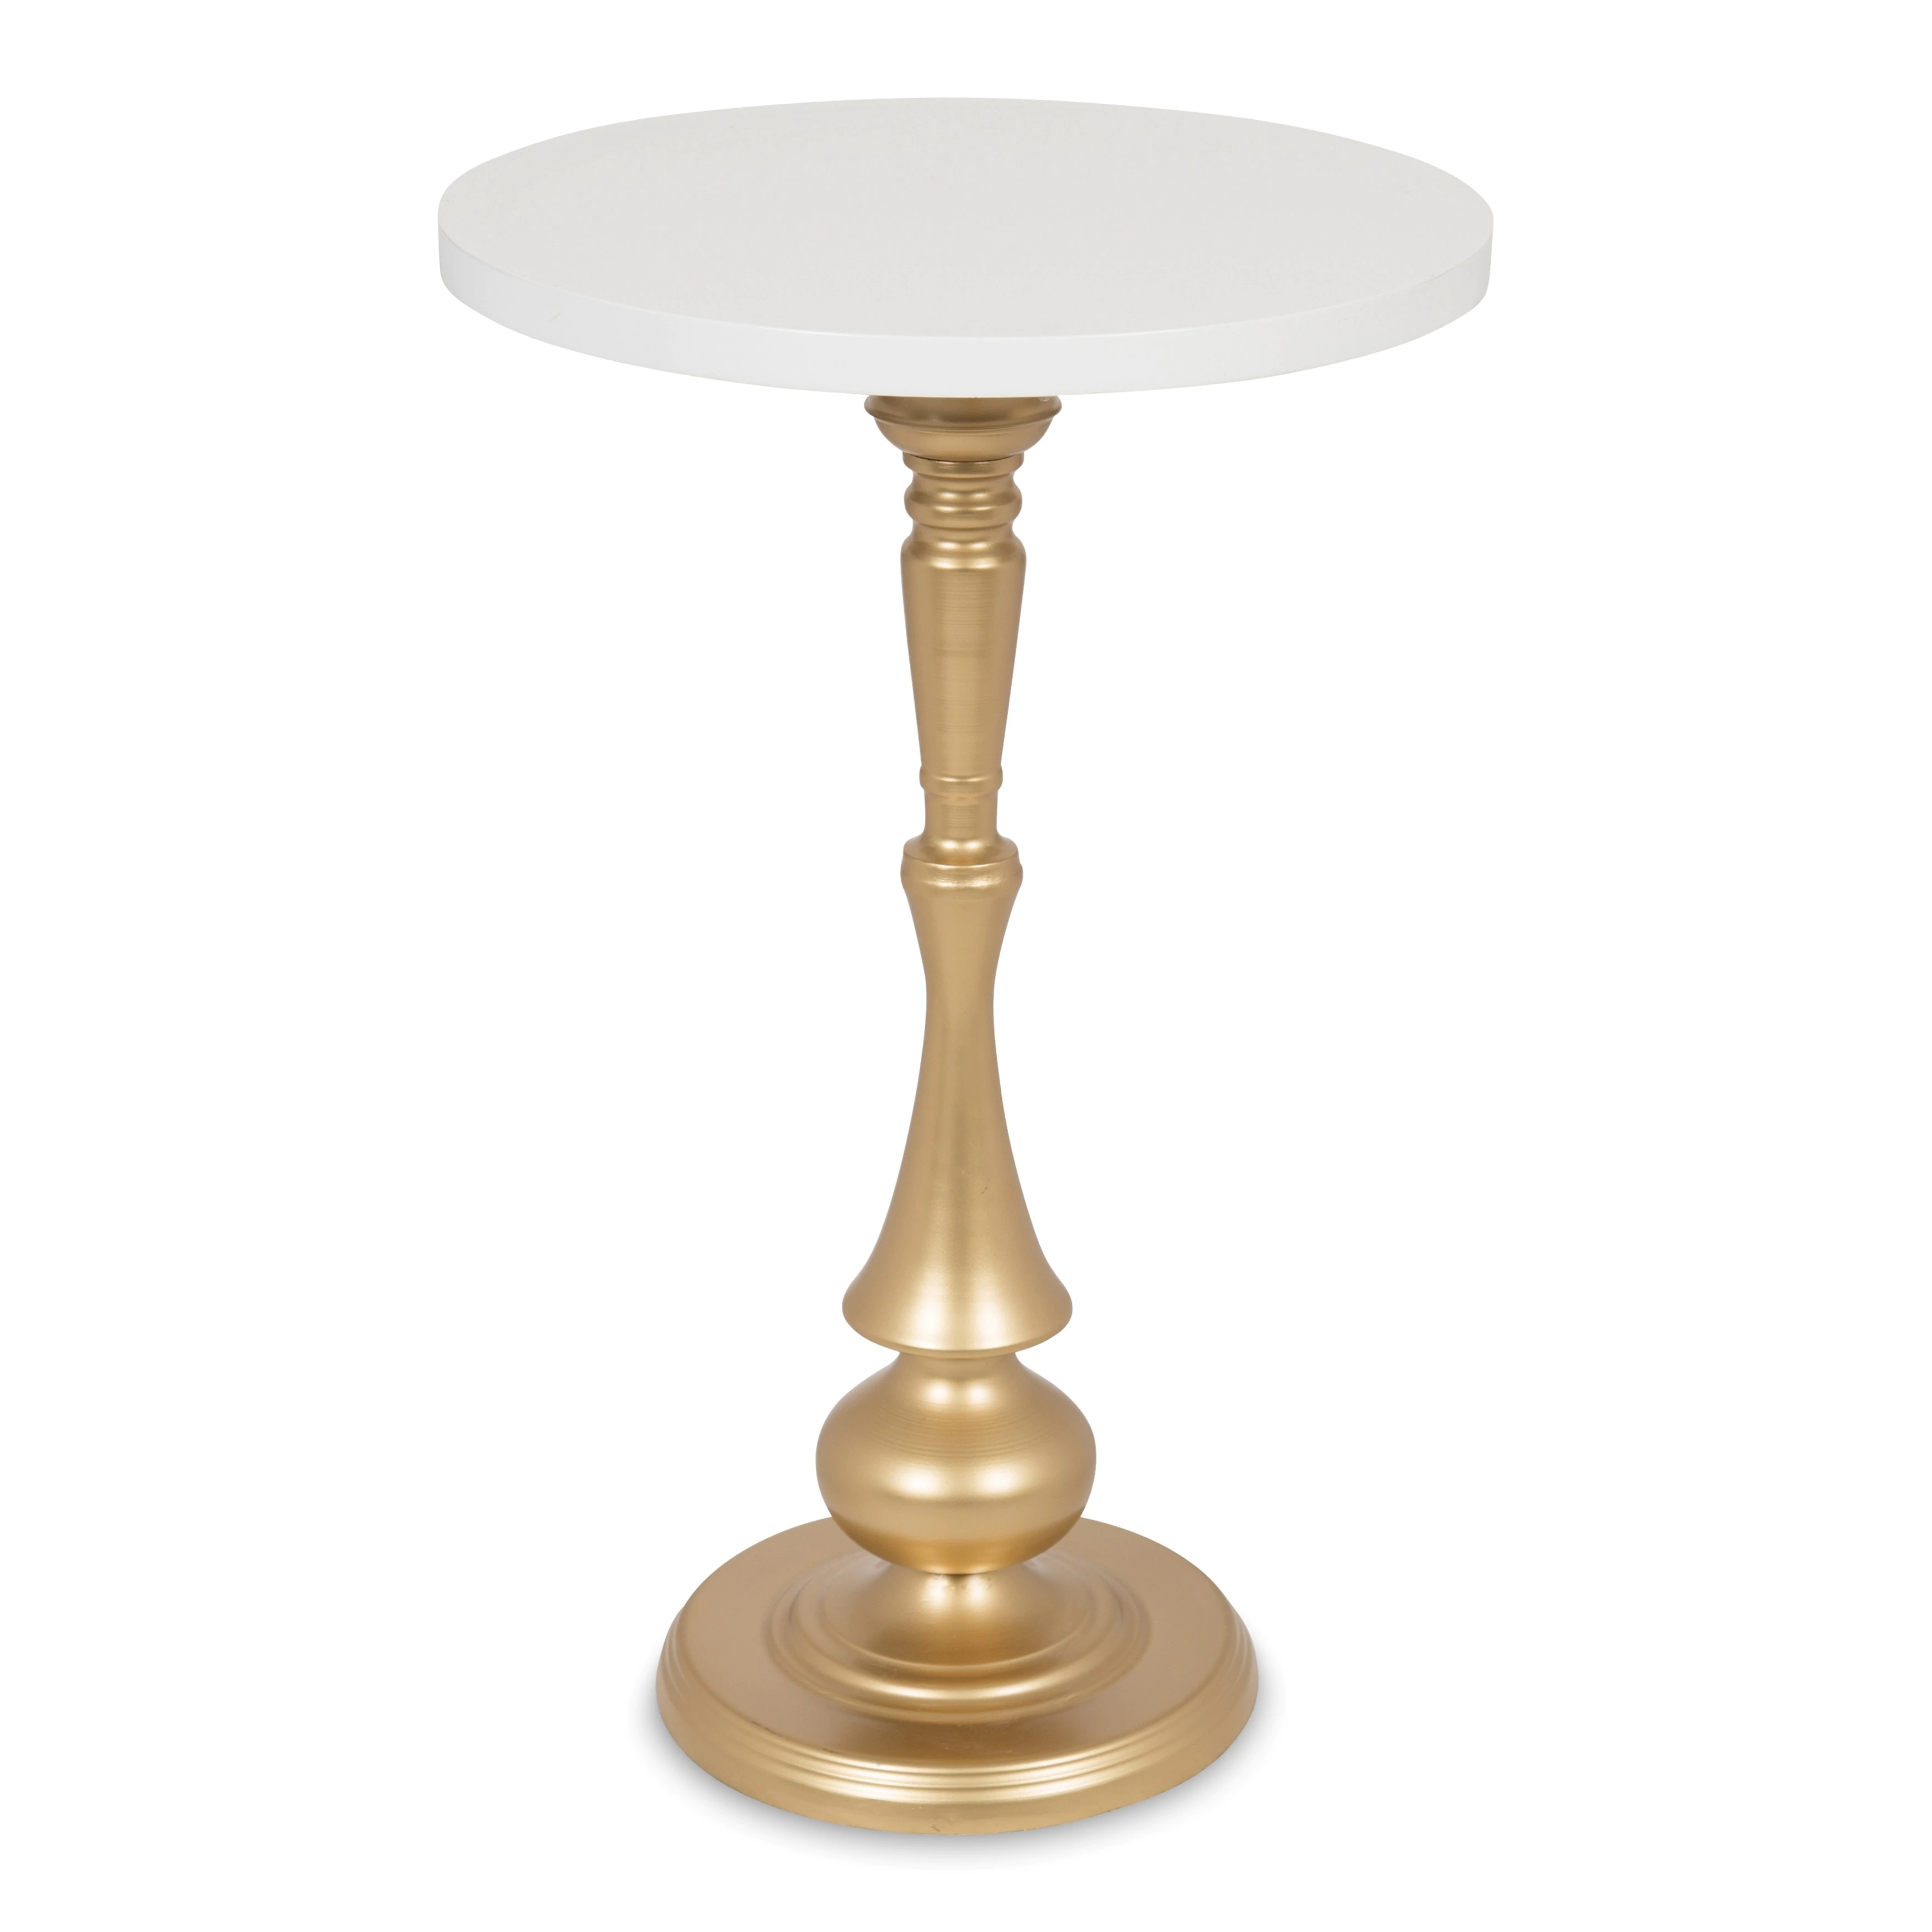 kate and laurel regina round metal wood pedestal accent table free shipping today lacey furniture slim white bedside glass lamps target rose gold side coffee tray cymbal stand